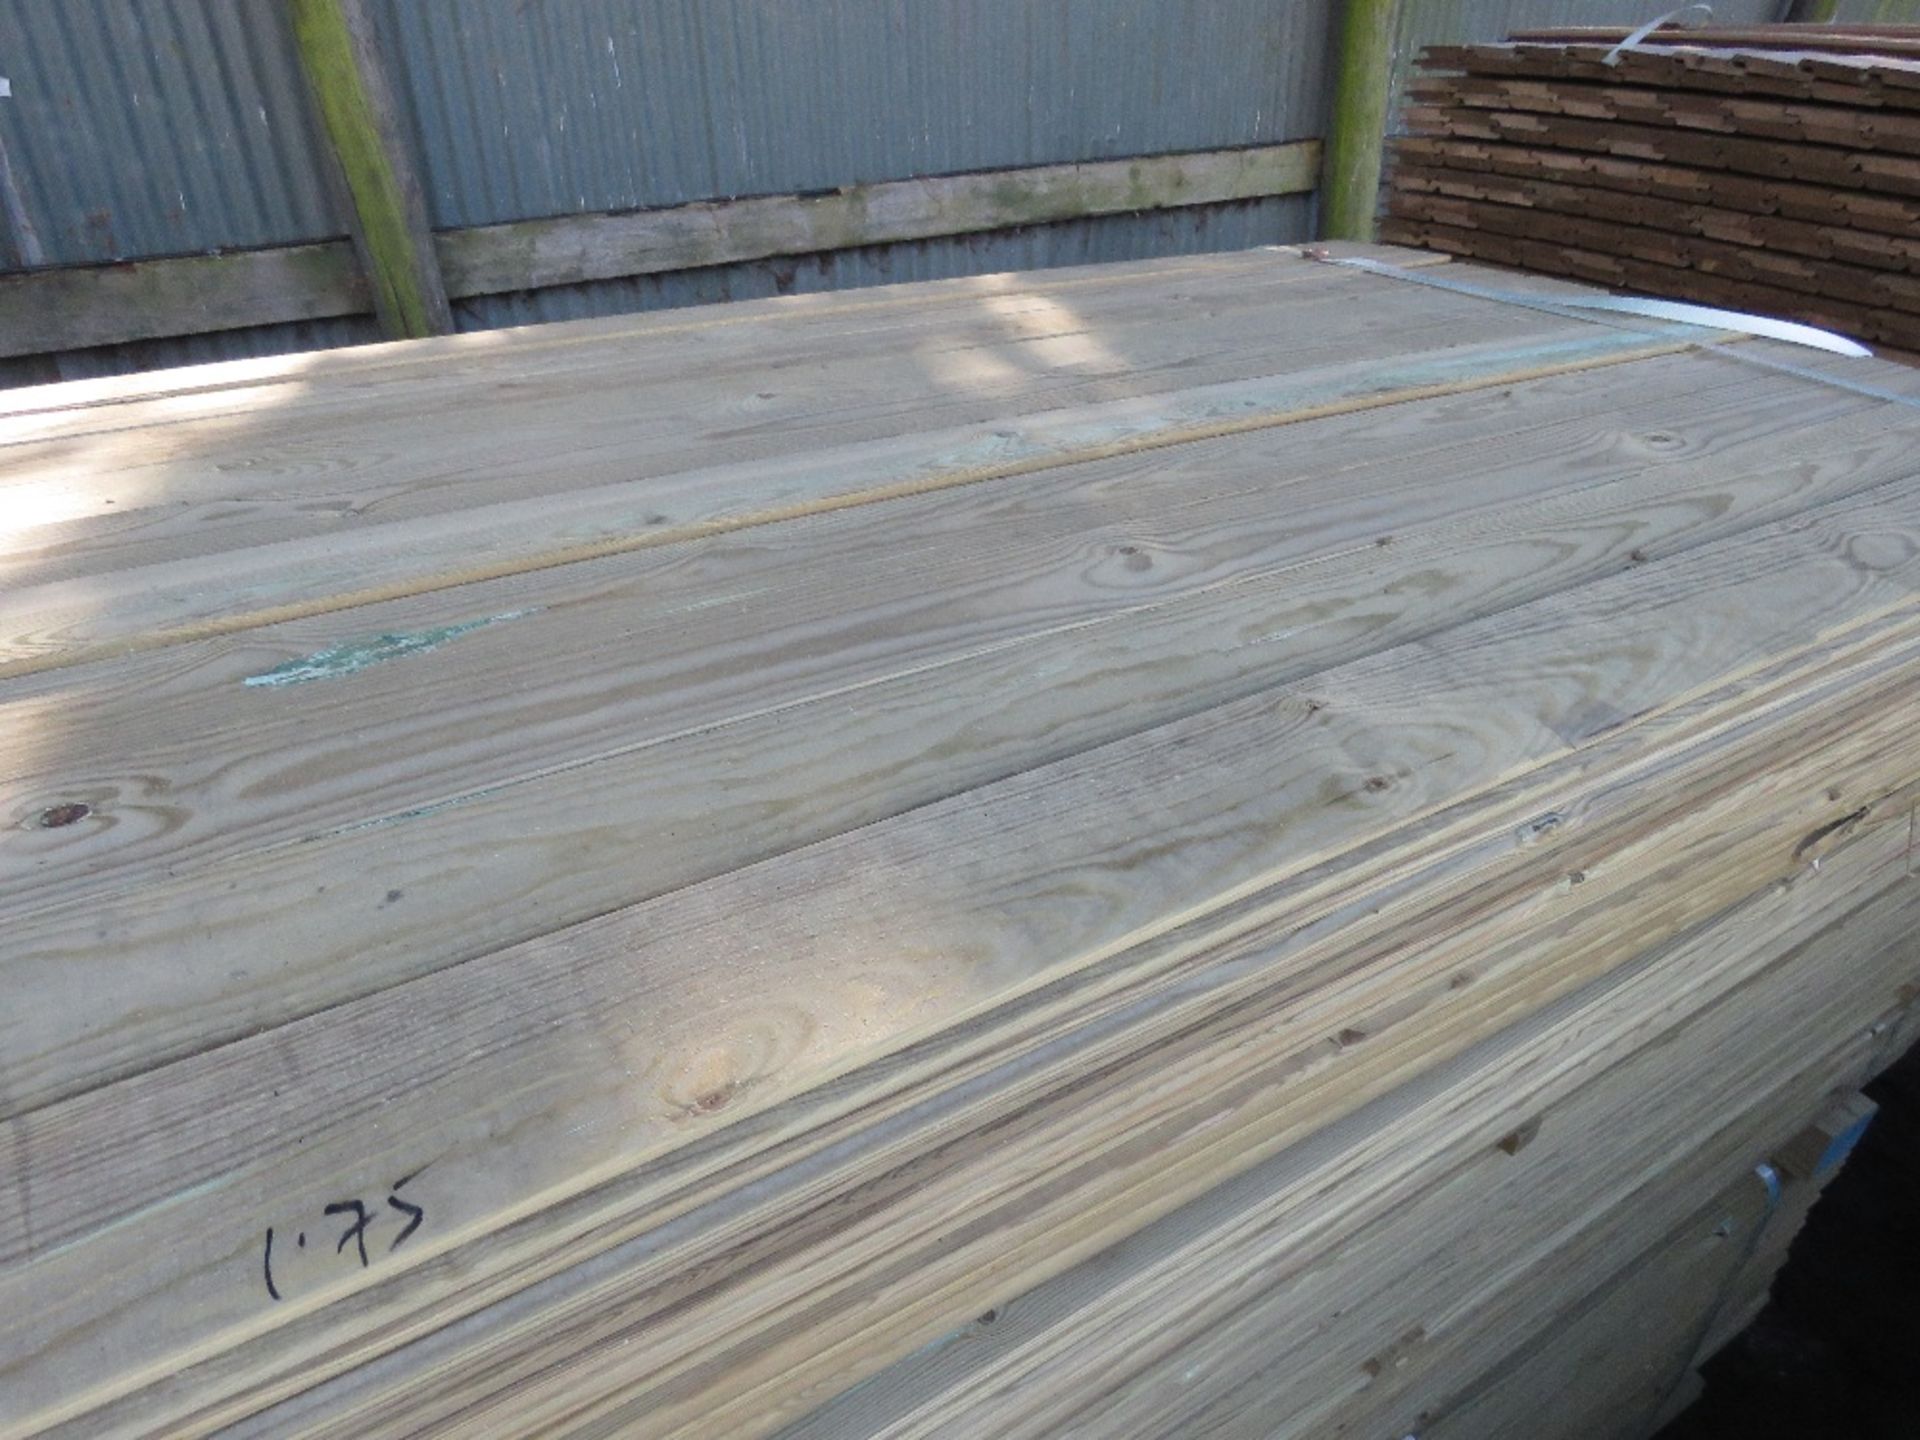 PACK OF HIT AND MISS TYPE PRESSURE TREATED FENCE CLADDING TIMBER BOARDS. 1.75M LENGTH X 100MM WIDTH - Image 3 of 3